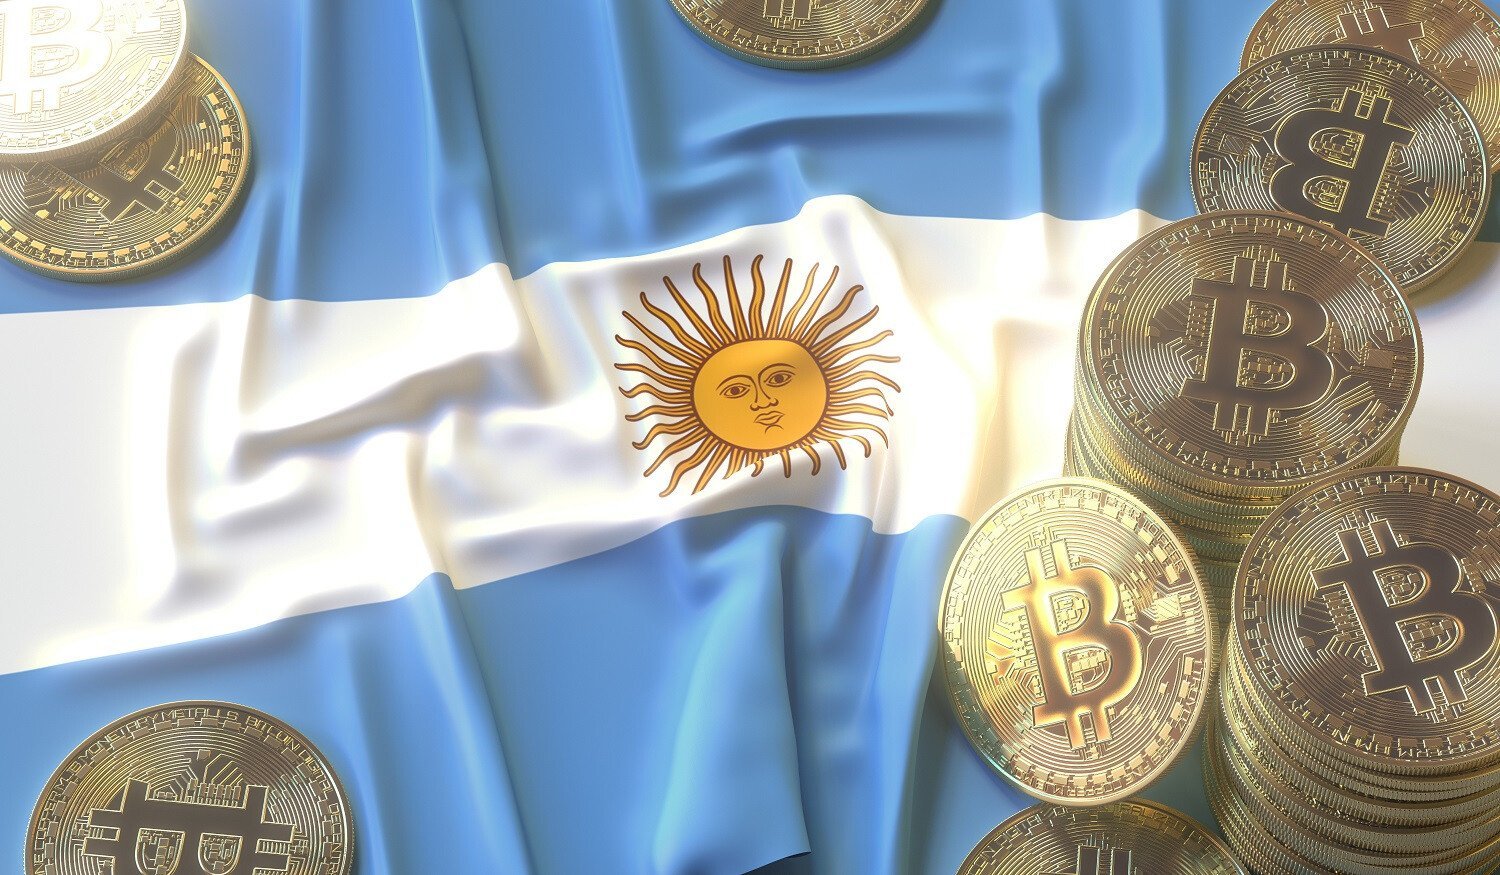 Argentina’s new president legalizes all foreign currencies, including Bitcoin payments